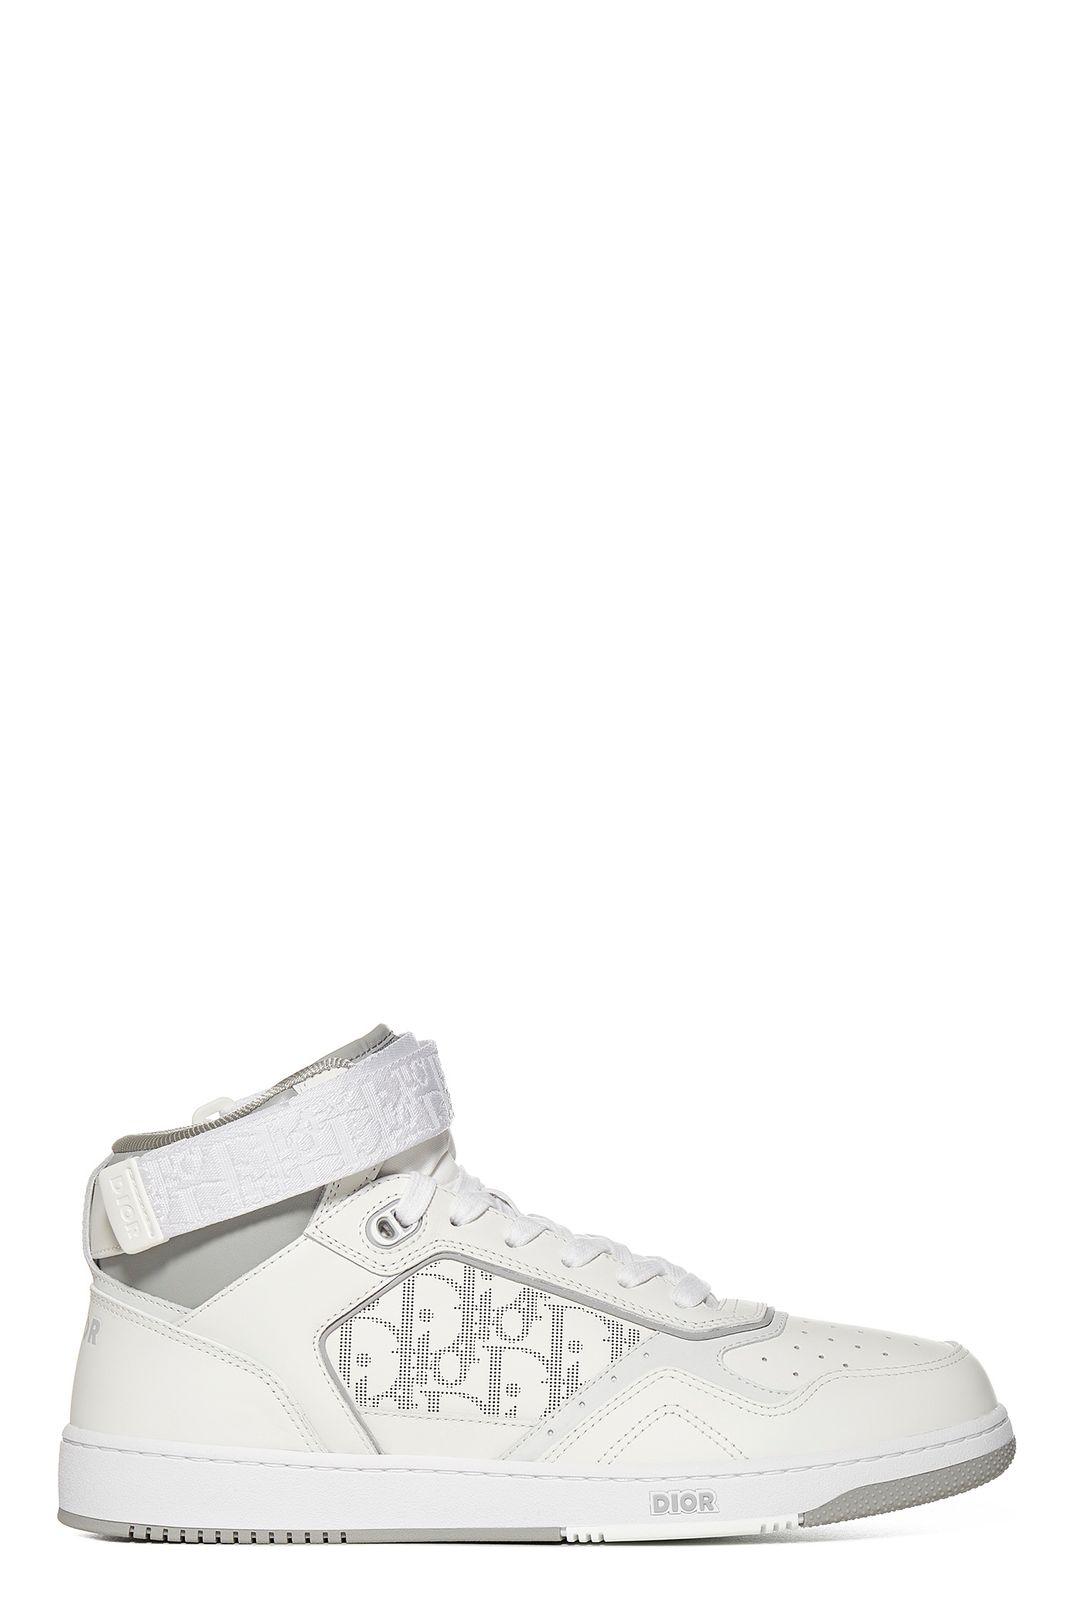 Dior B27 Dior Oblique Galaxy High-top Sneakers in White for Men | Lyst